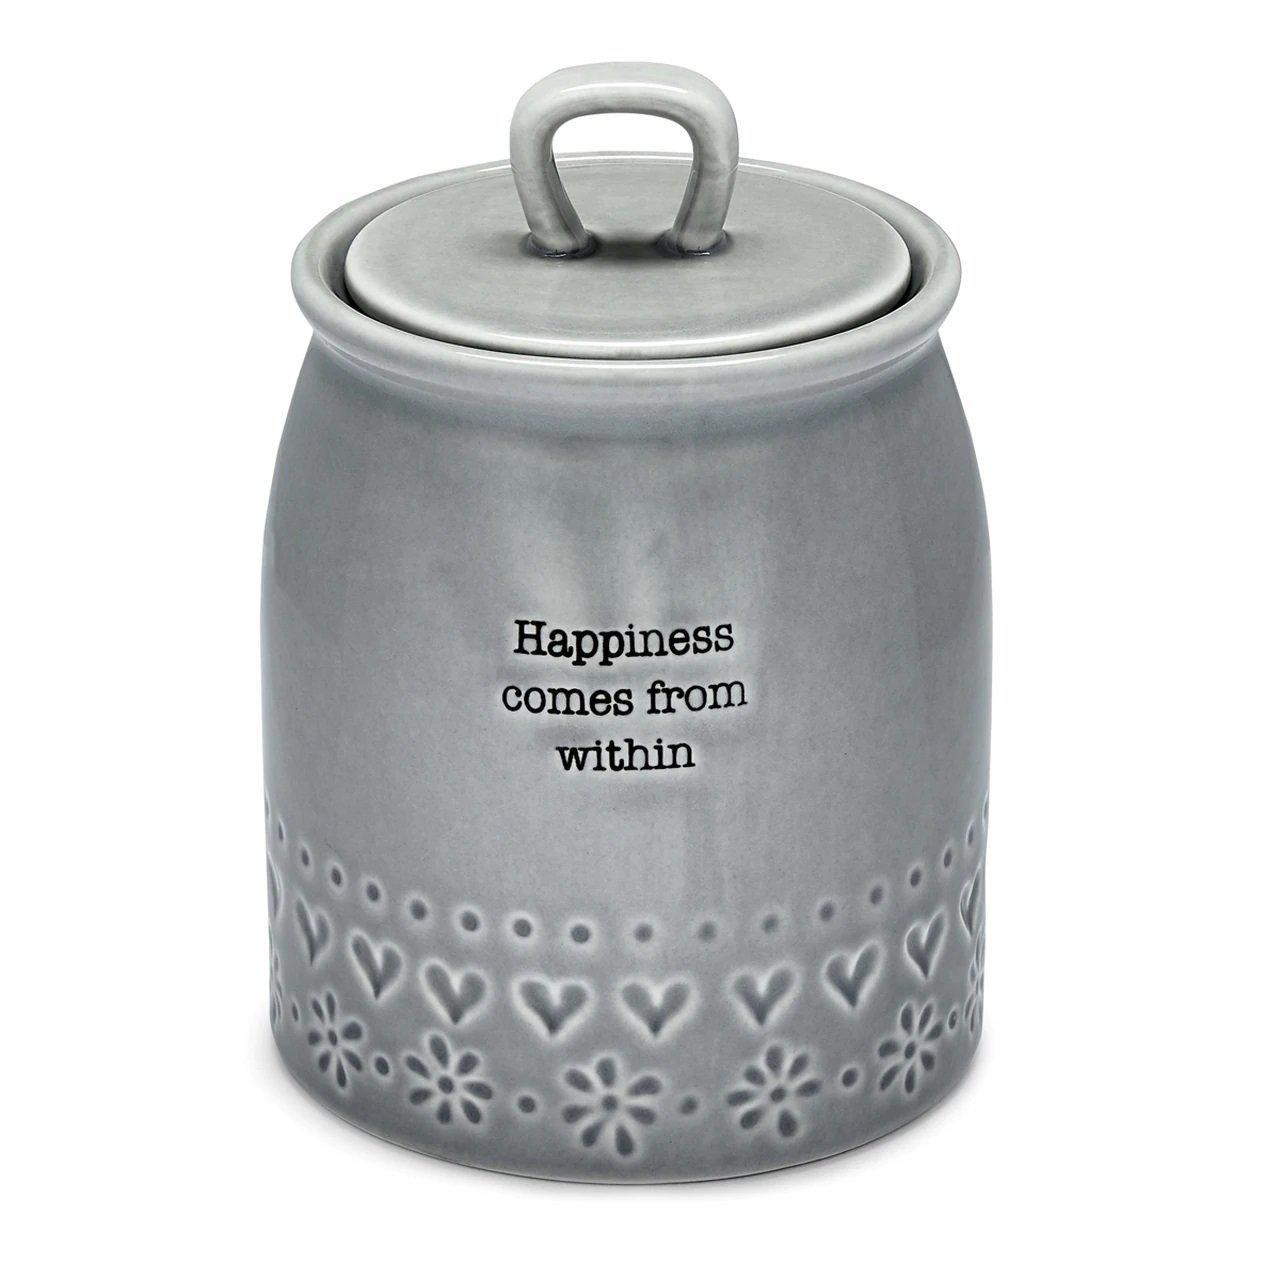 Purity - Canister 'Happiness comes from within'-Homeware-City Look-Thursford Enterprises Ltd.